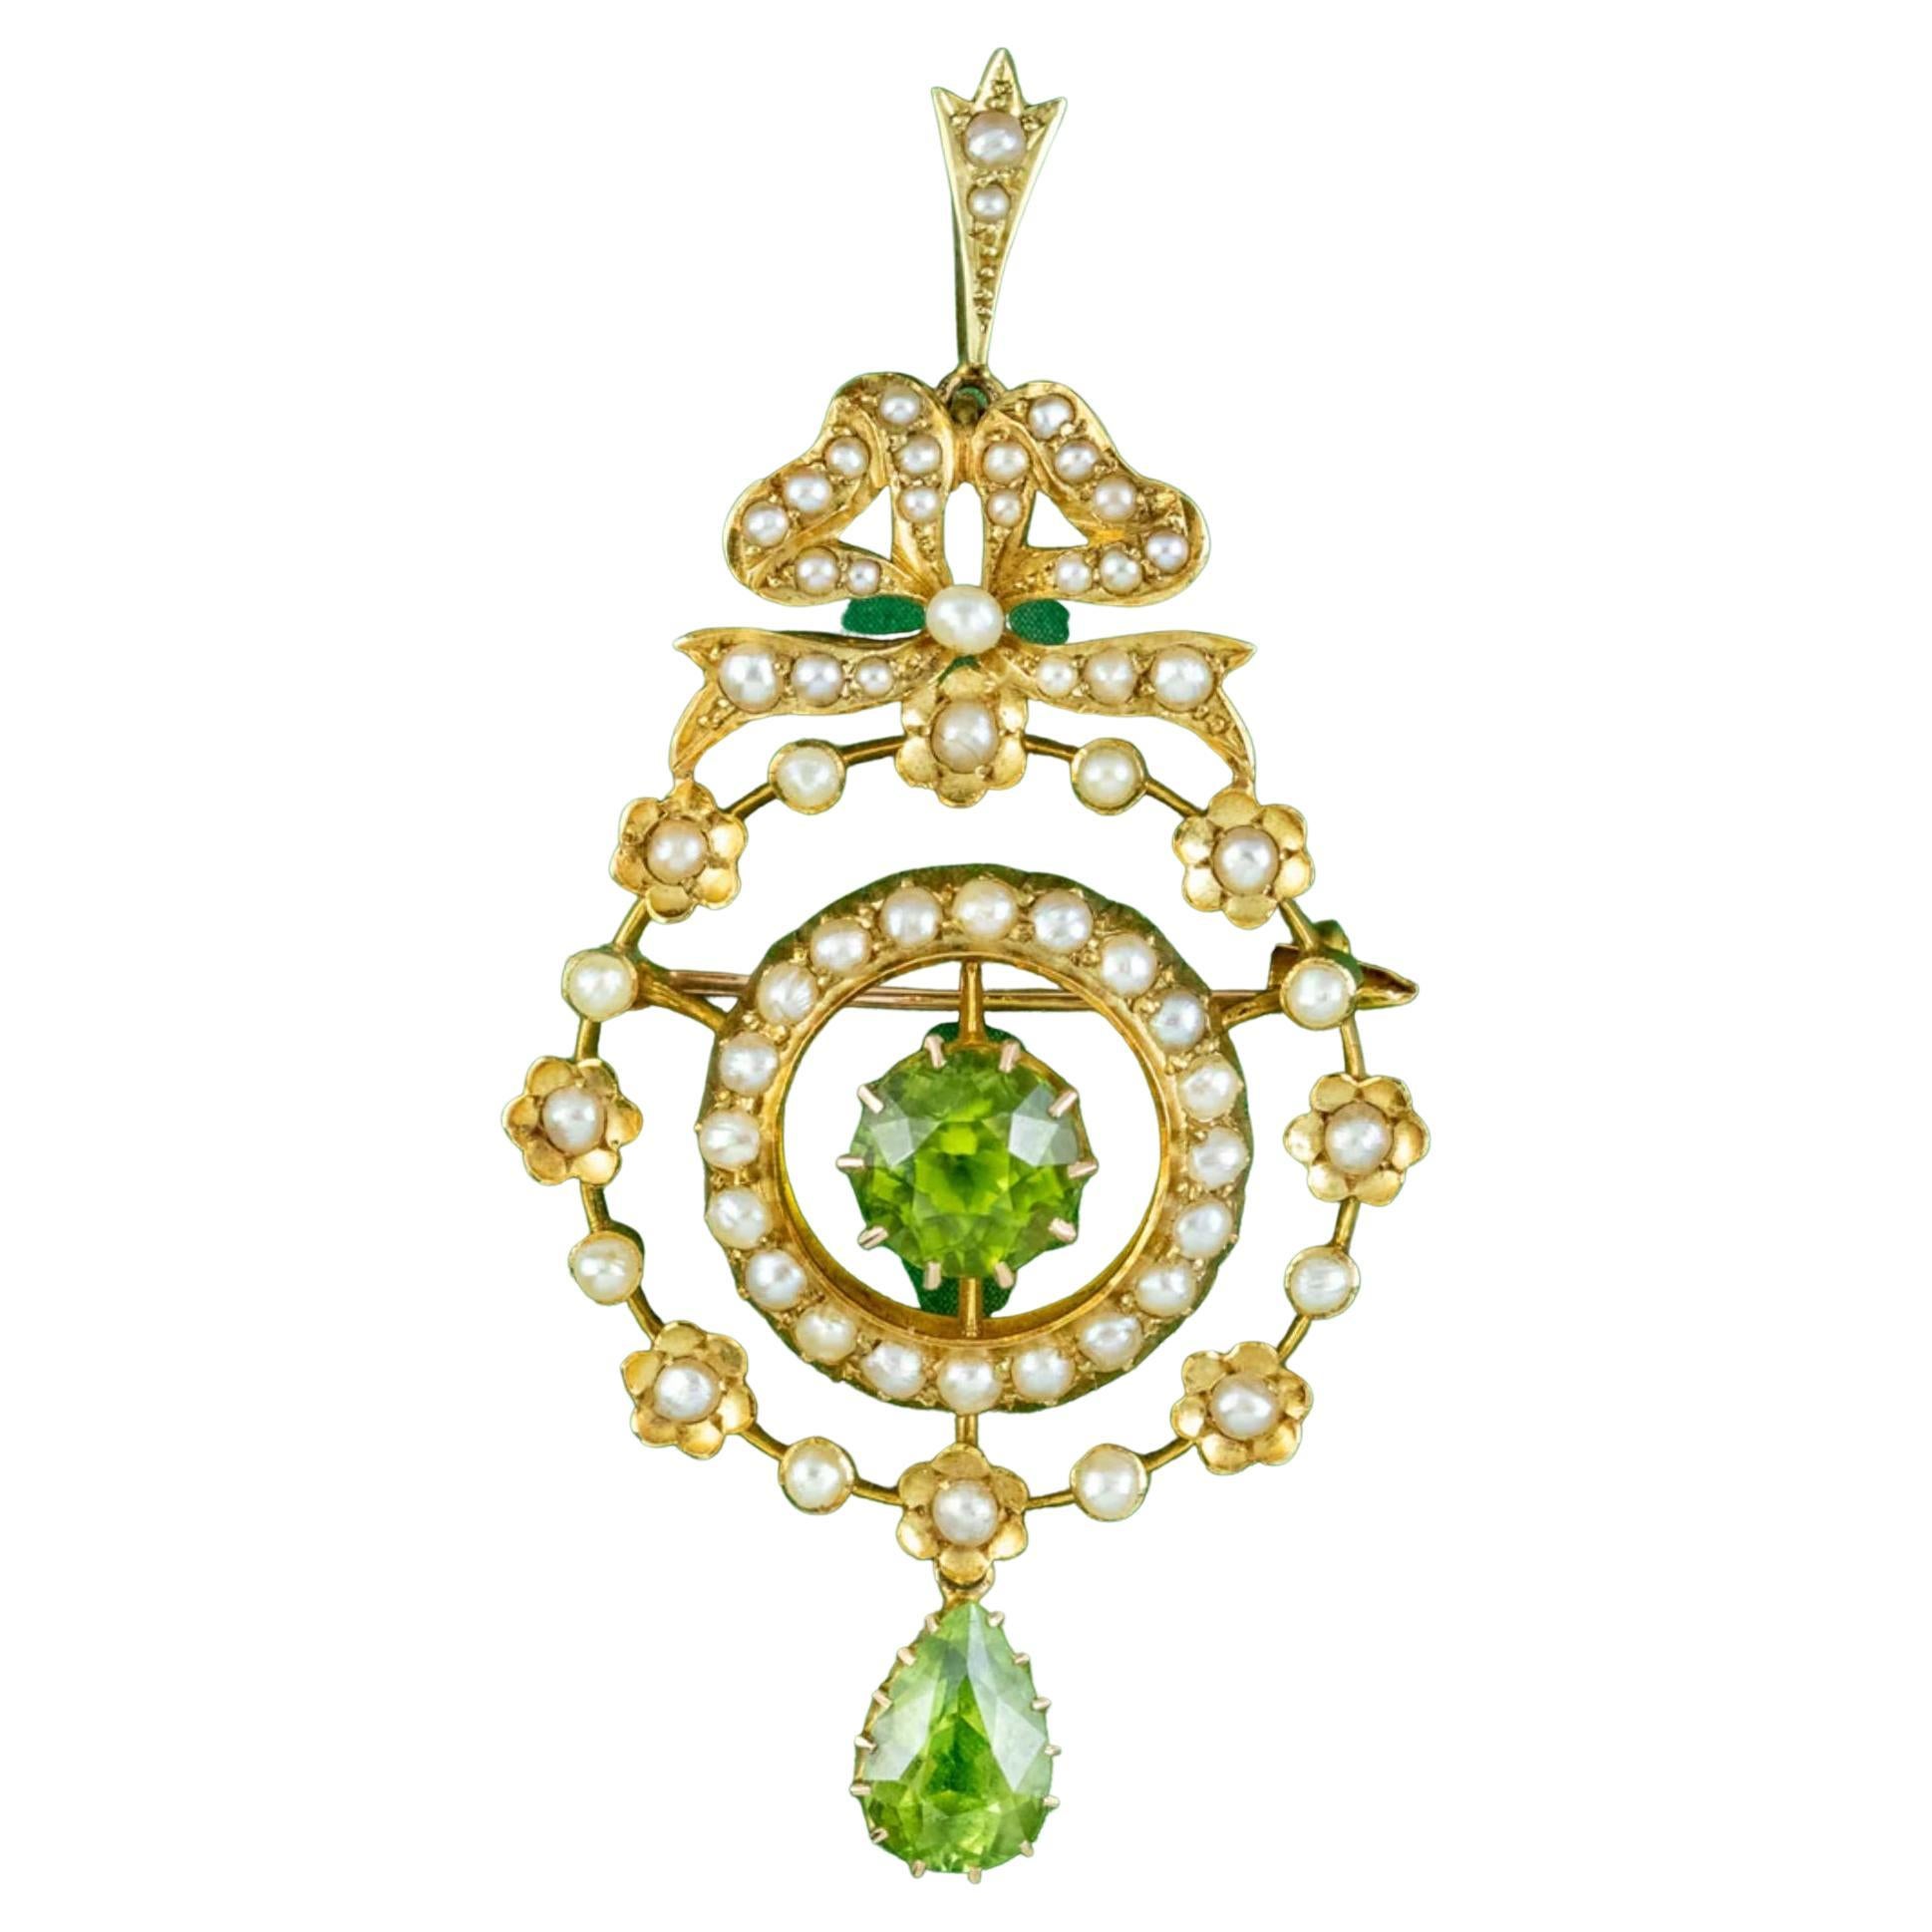 Antique Edwardian Peridot Pearl Pendant in 15ct Gold, circa 1901-1915 For Sale